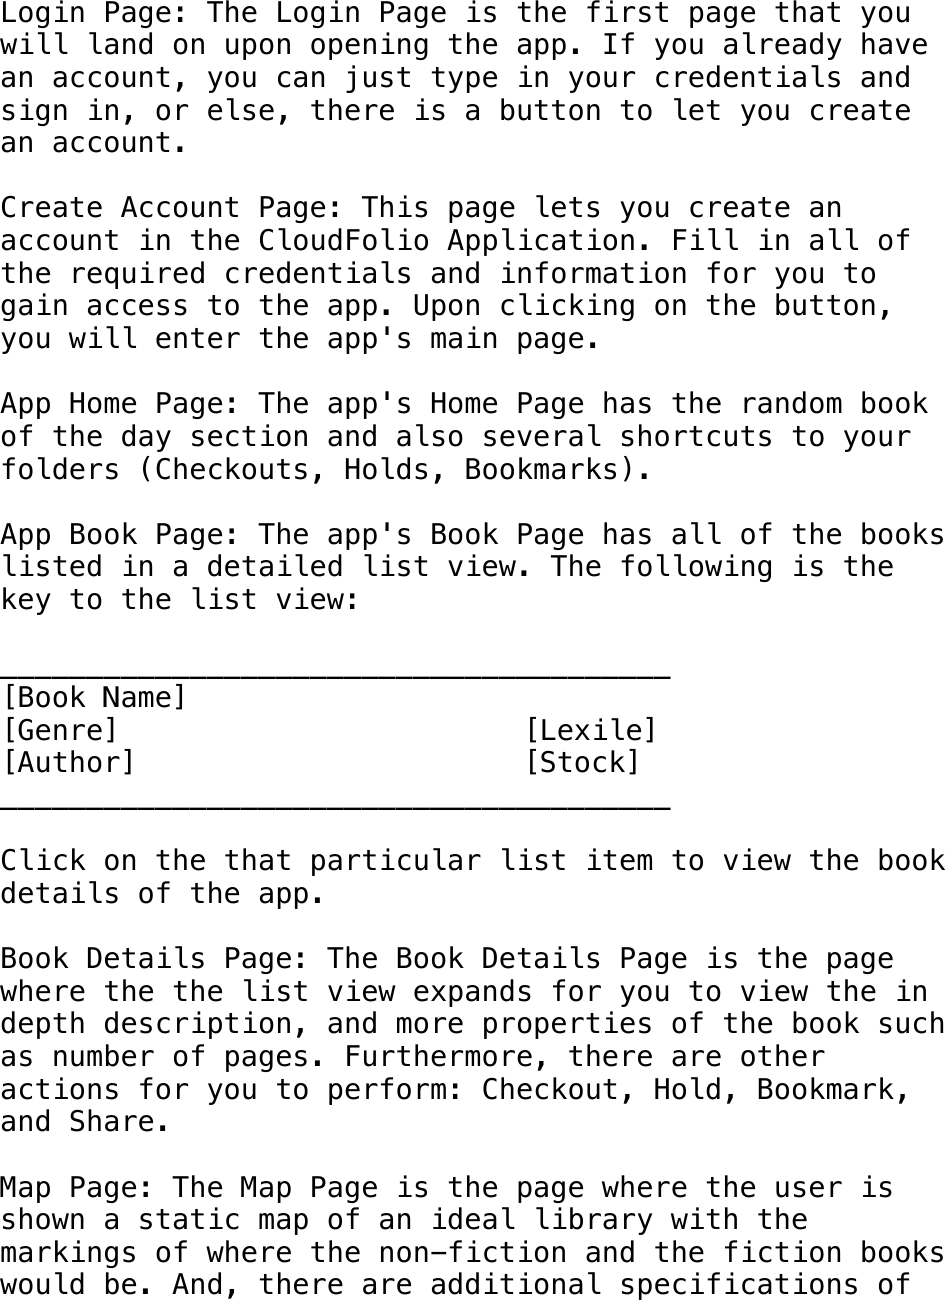 Page 2 of 10 - Cloud Folio Instructions